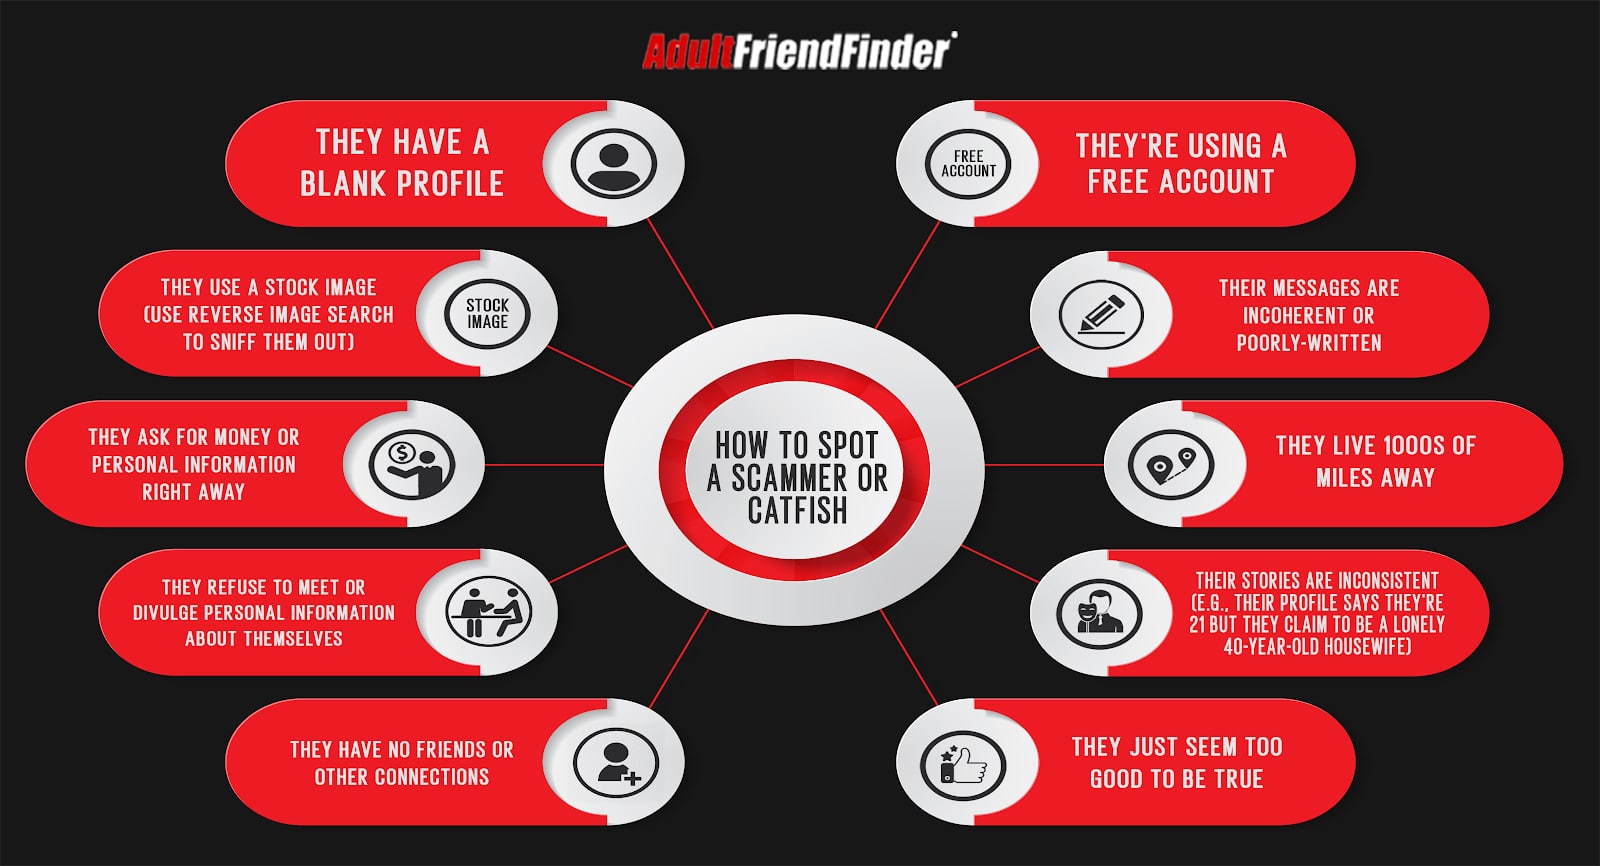 AdultFriendFinder Review — Is AFF Legit or a Waste of Time? I spent 3 months as an AFF member, here is my review - Events